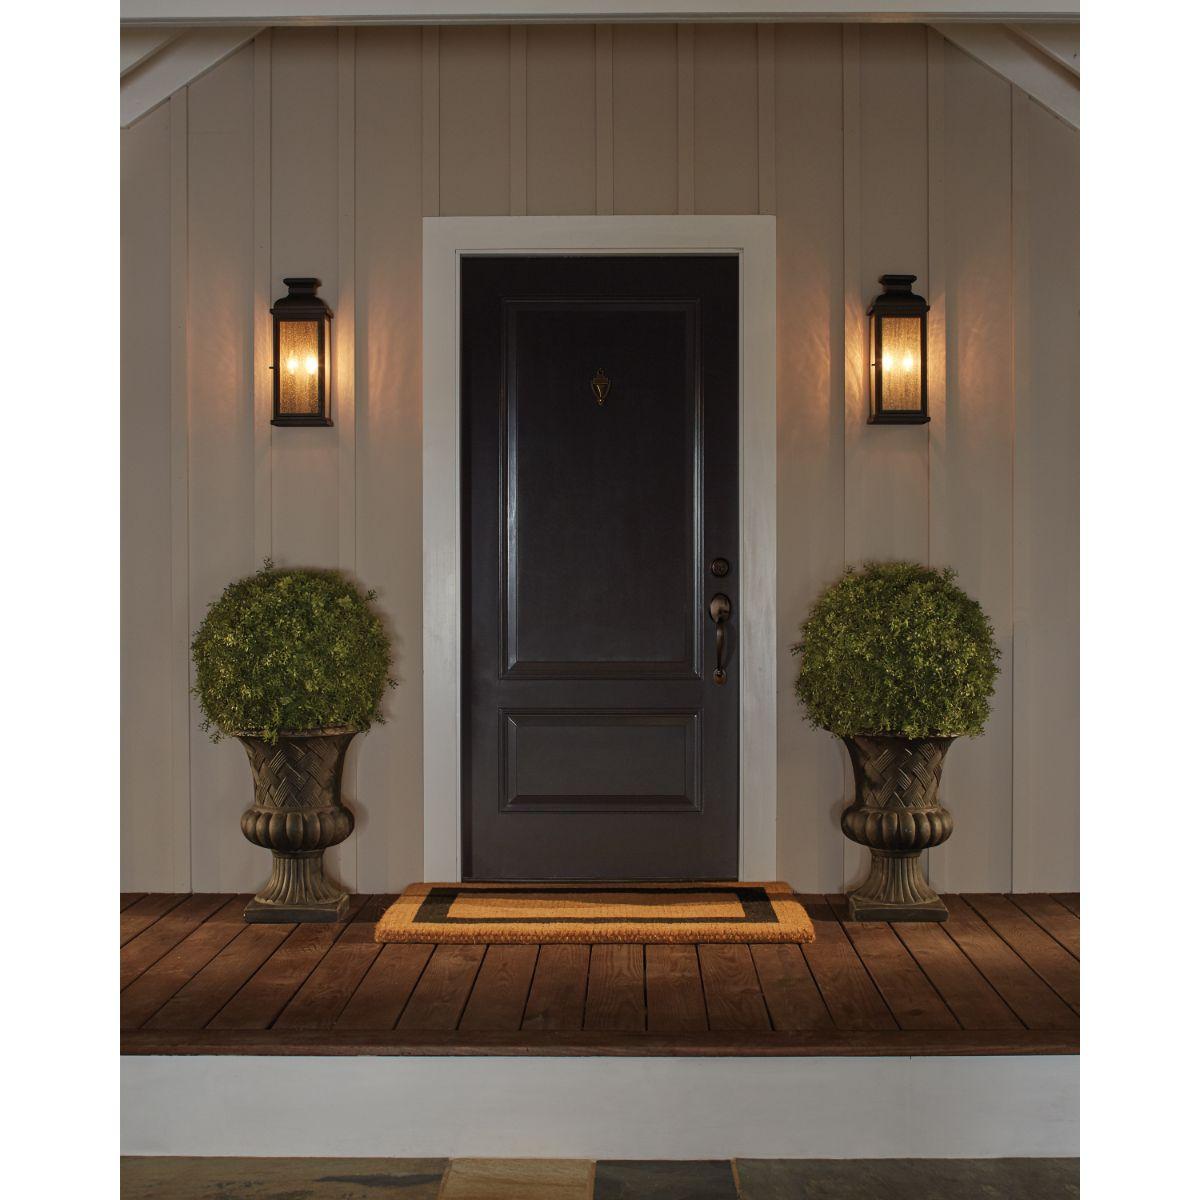 Pediment 24 In. 3 Lights Outdoor Wall Sconce Black Finish